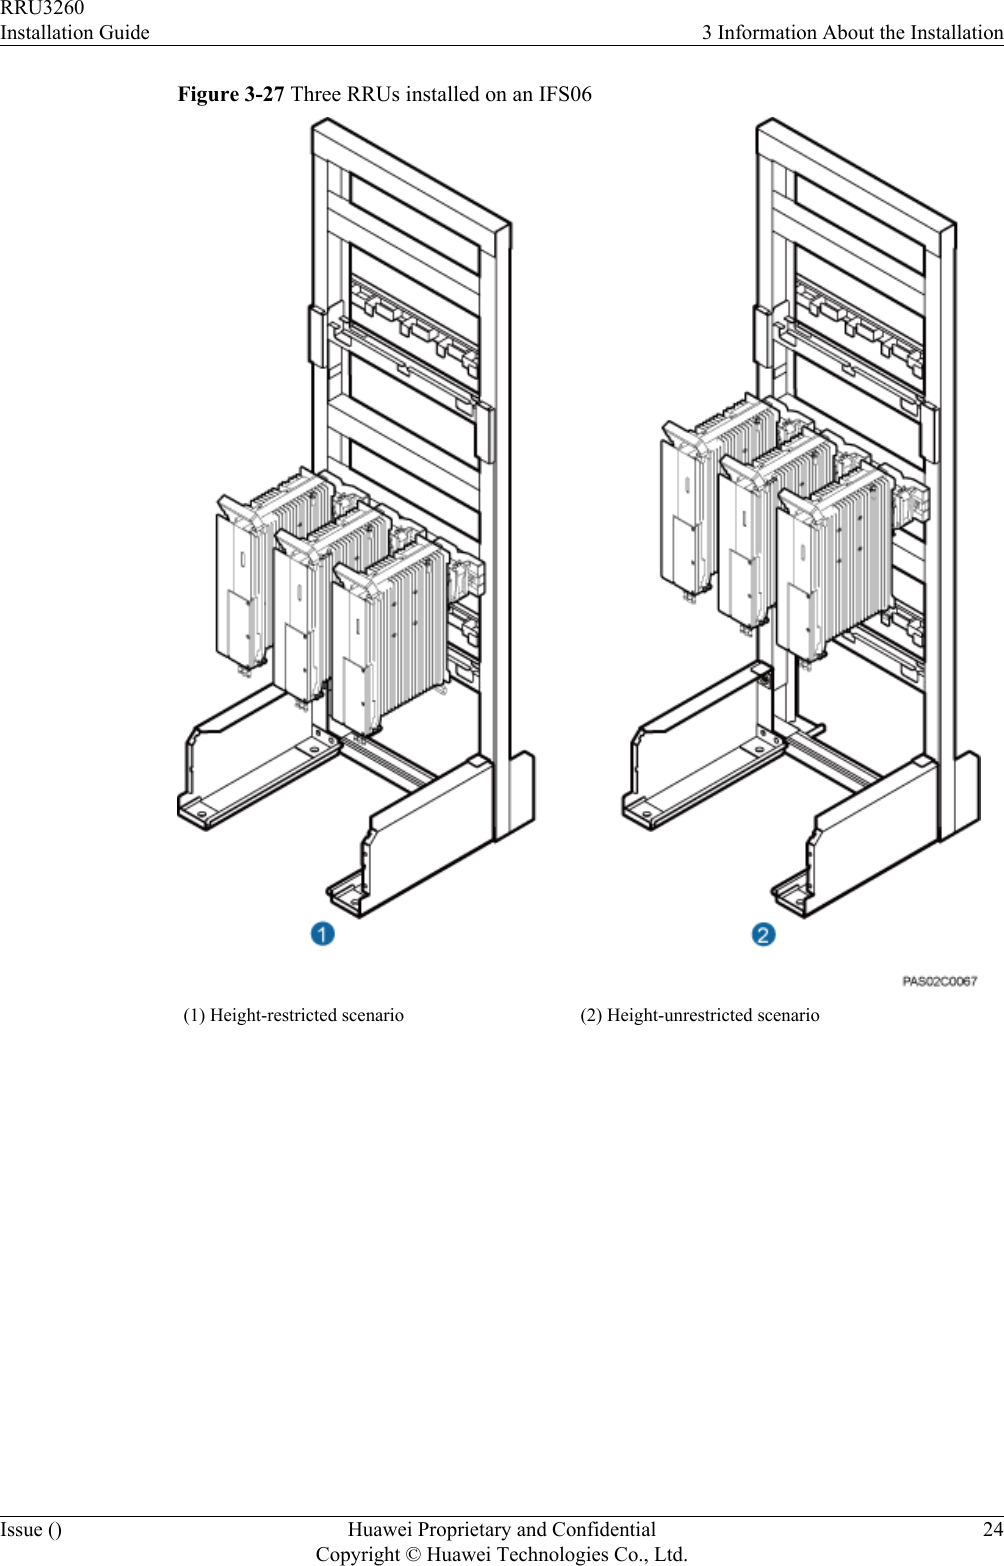 Figure 3-27 Three RRUs installed on an IFS06(1) Height-restricted scenario (2) Height-unrestricted scenario RRU3260Installation Guide 3 Information About the InstallationIssue () Huawei Proprietary and ConfidentialCopyright © Huawei Technologies Co., Ltd.24